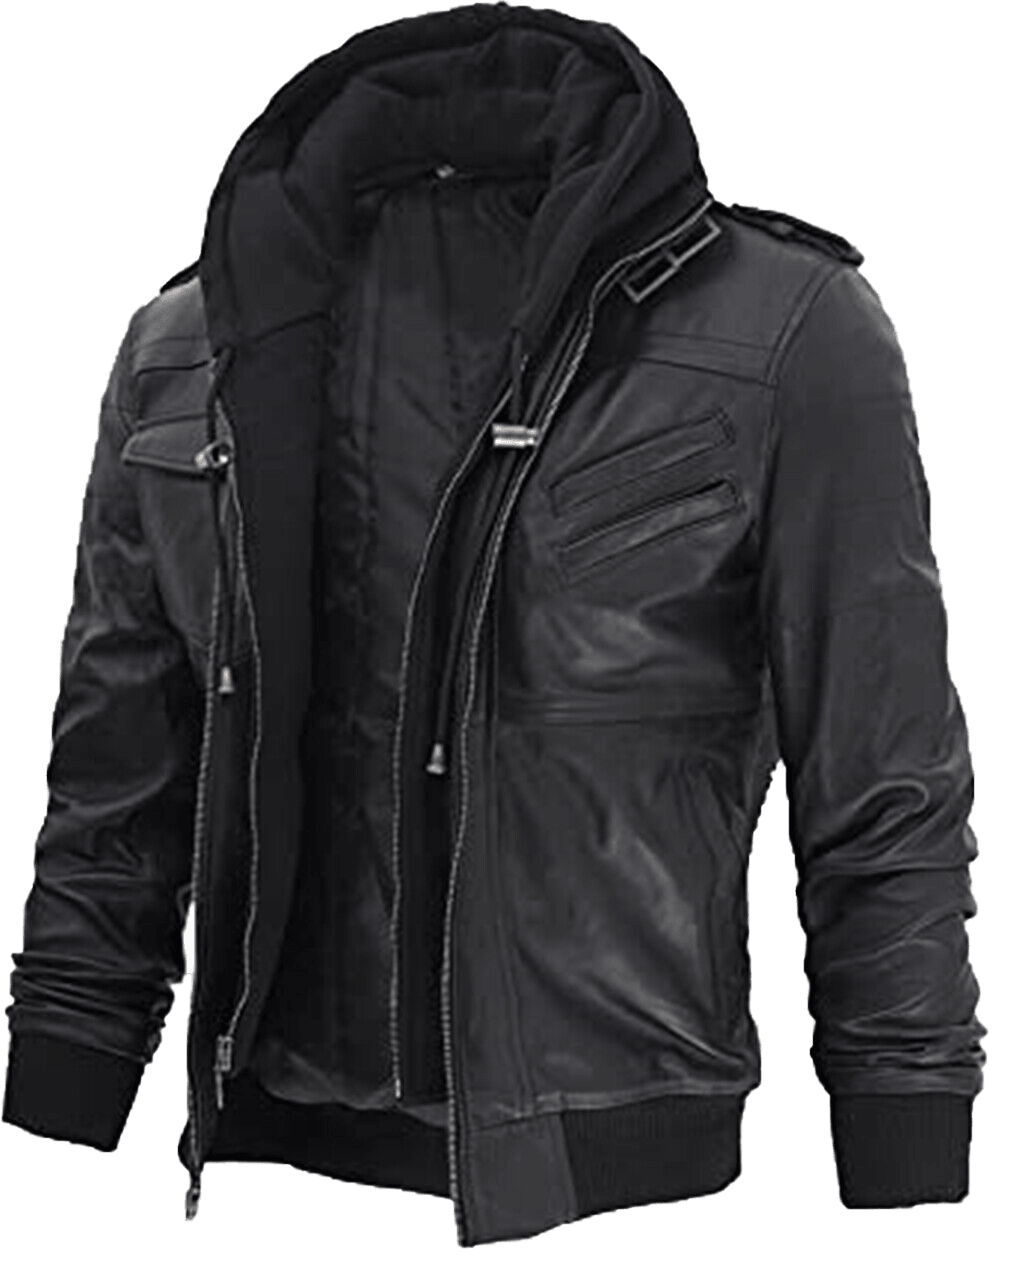 Men Black Leather Motorcycle Jacket with Removable Hood | Men Black Motorcycle Leather Jacket with Removable Hood - Button Stitched